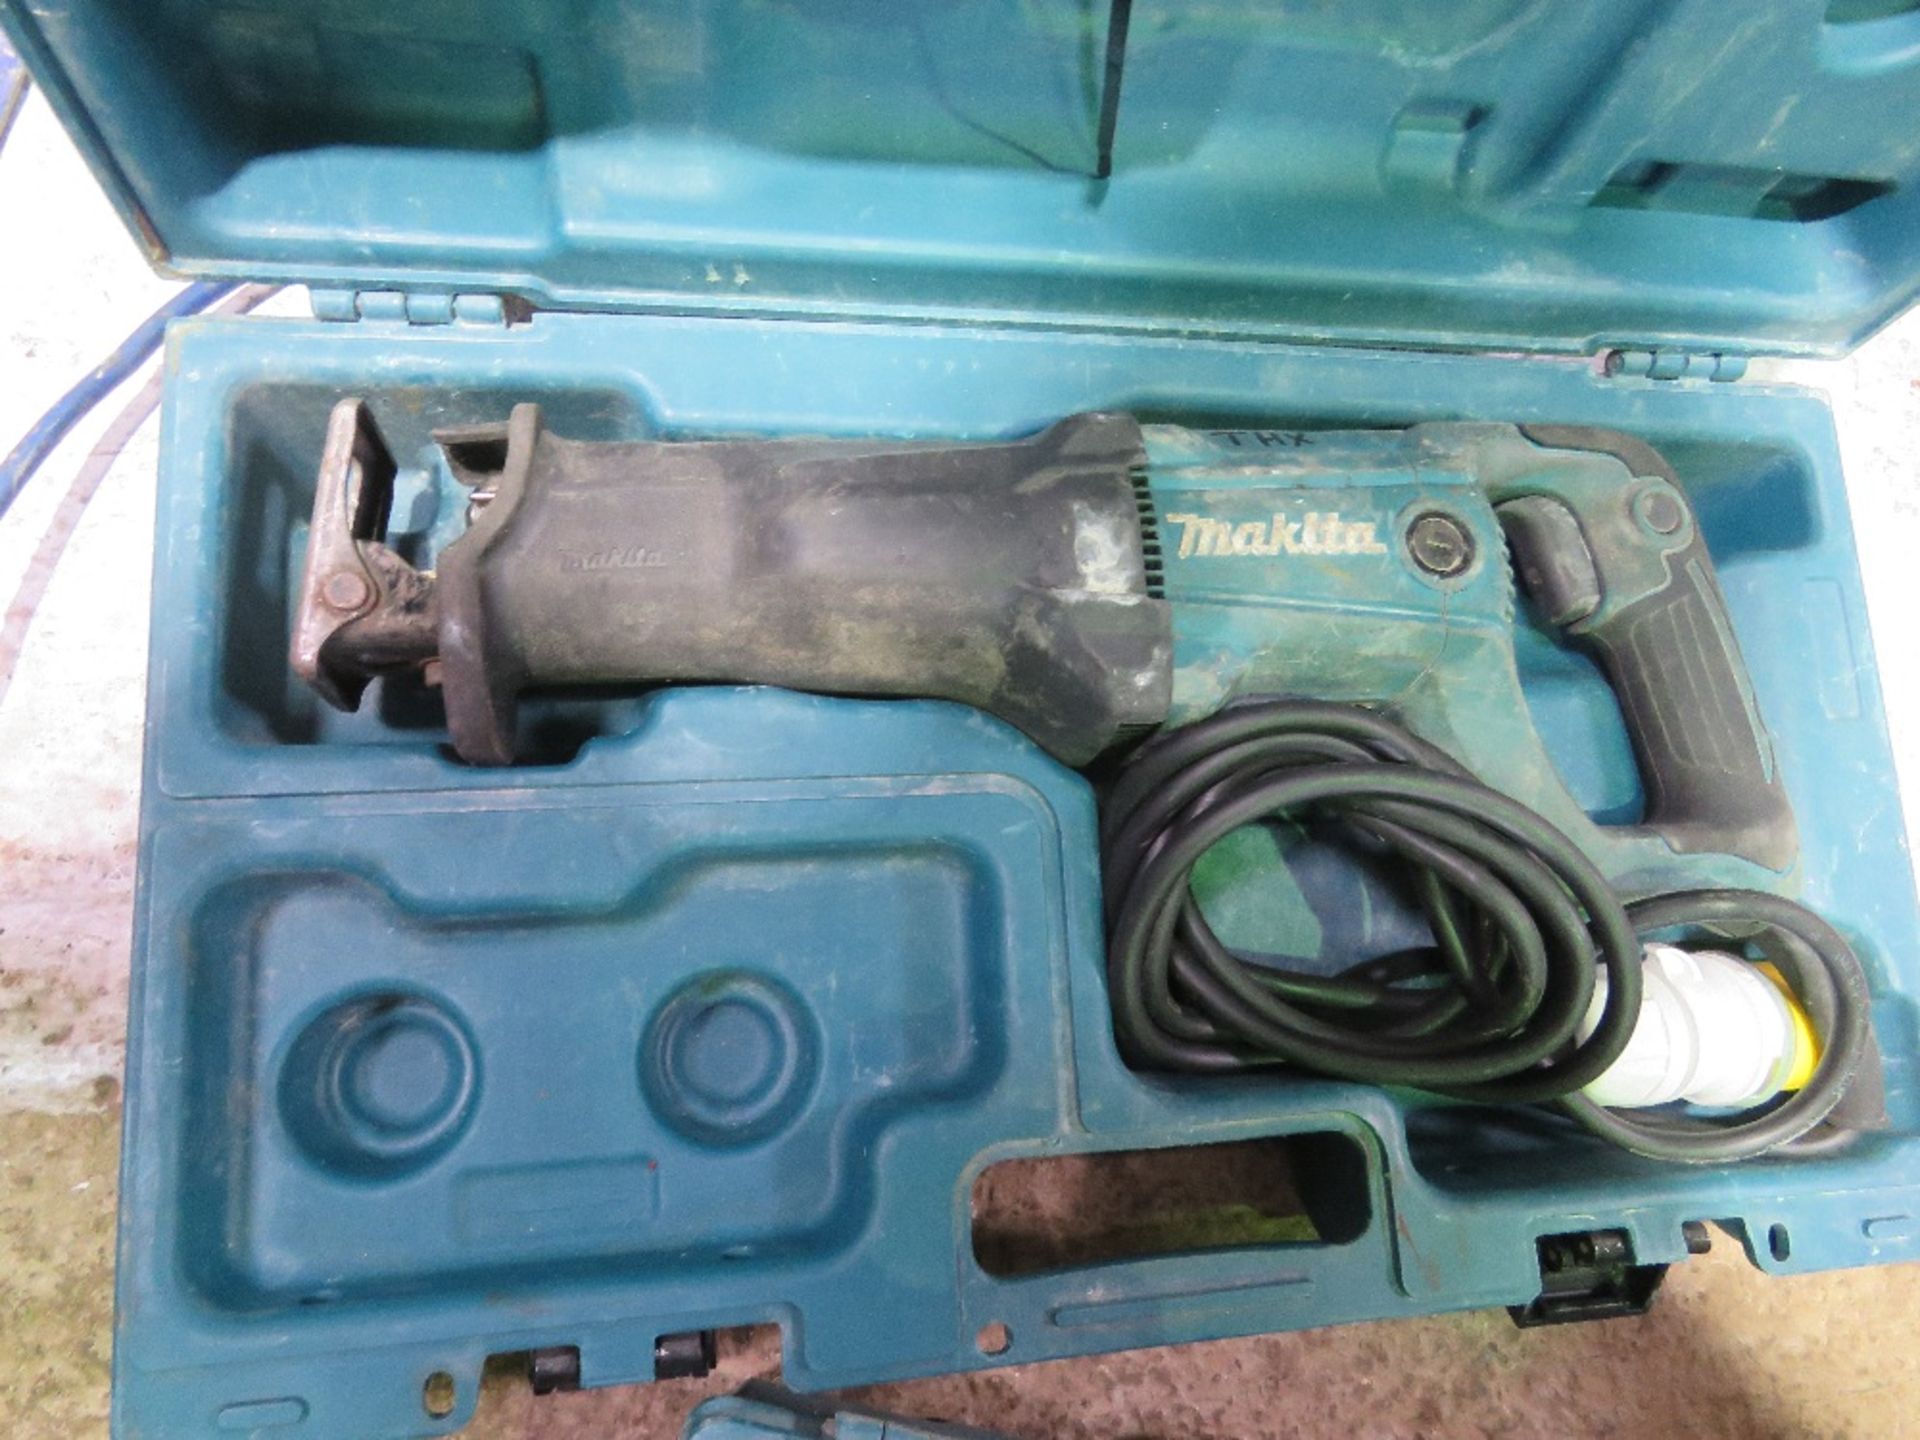 2 X MAKITA 110VOLT POWERED RECIPROCATING SAWS IN CASES THX13909,7627 - Image 3 of 4